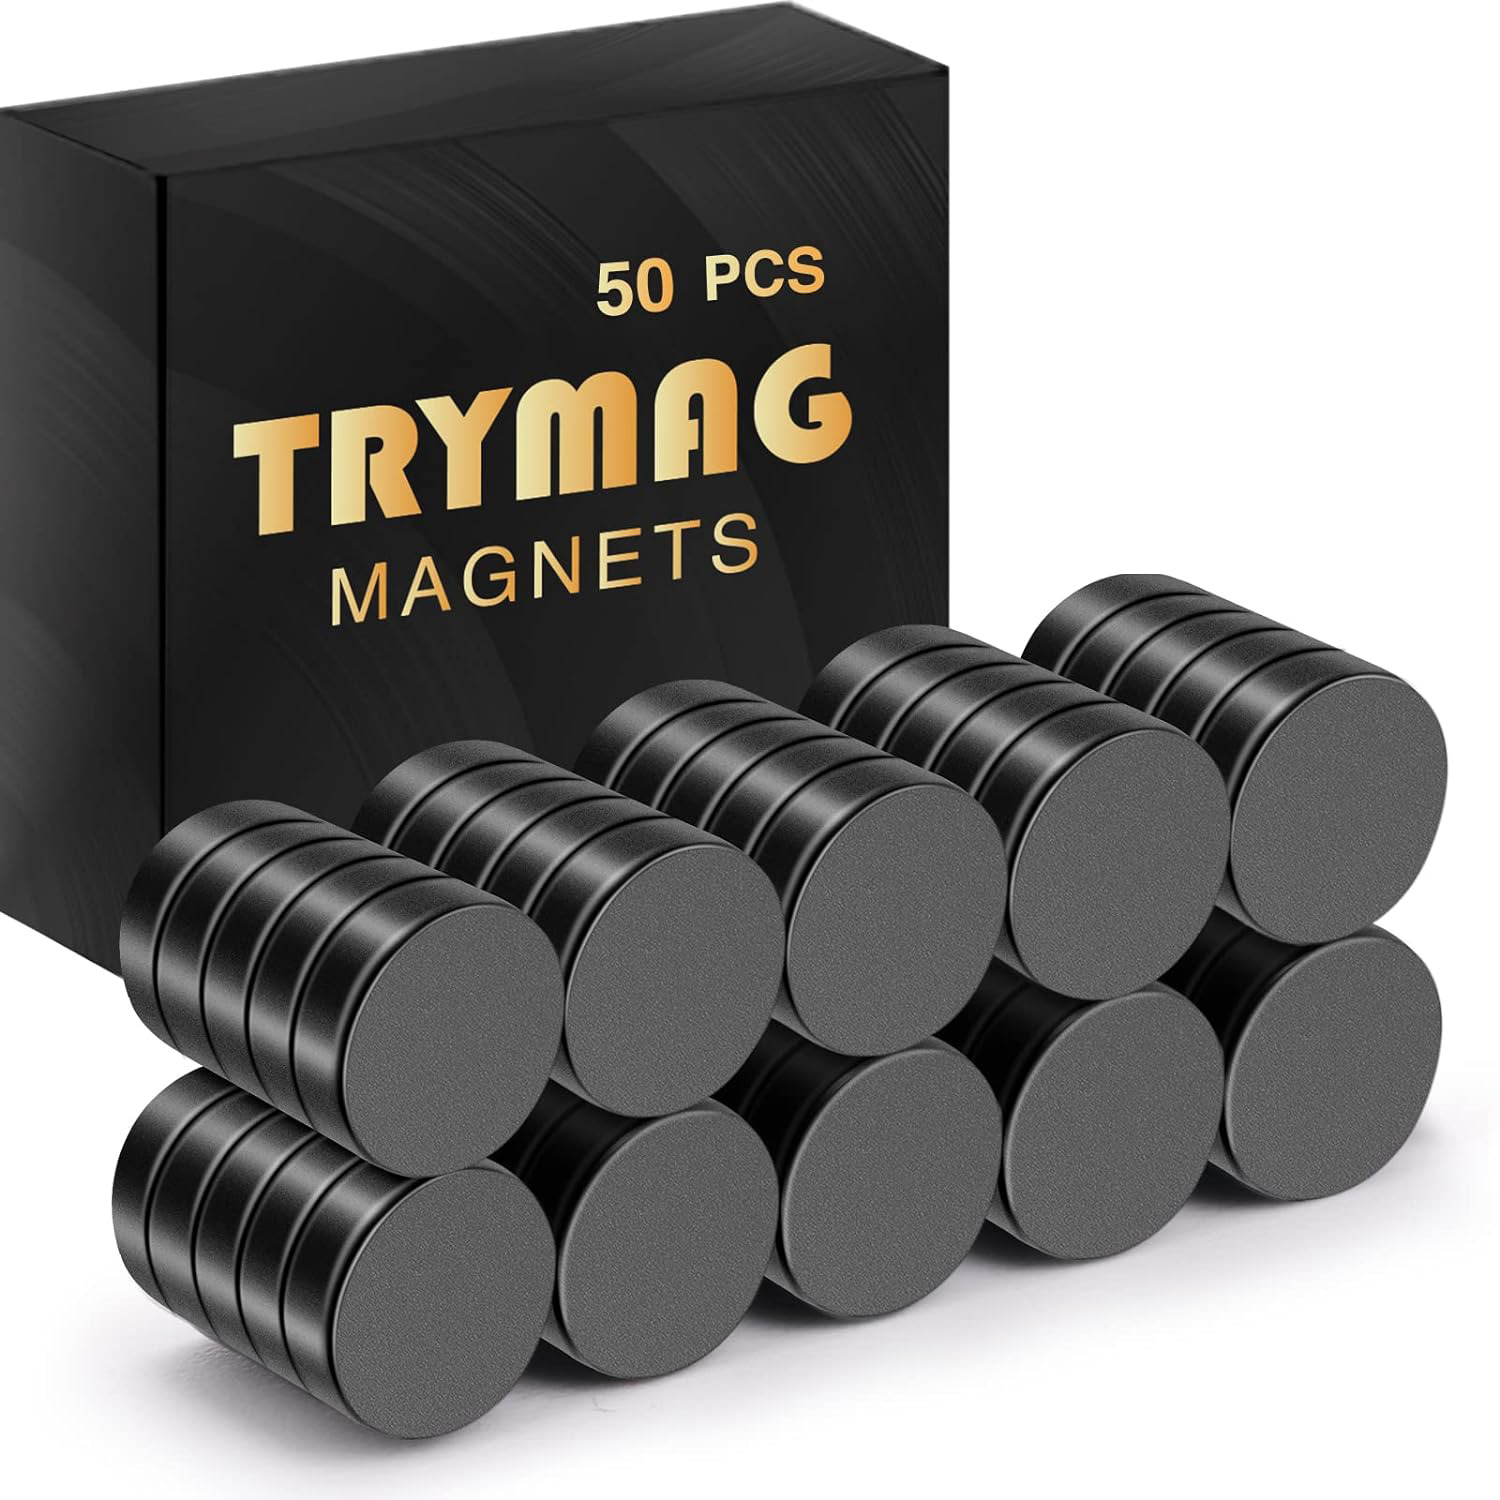 TRYMAG Small Refrigerator Magnets, 50Pcs Rare Earth Magnets, 10x3MM Black Strong